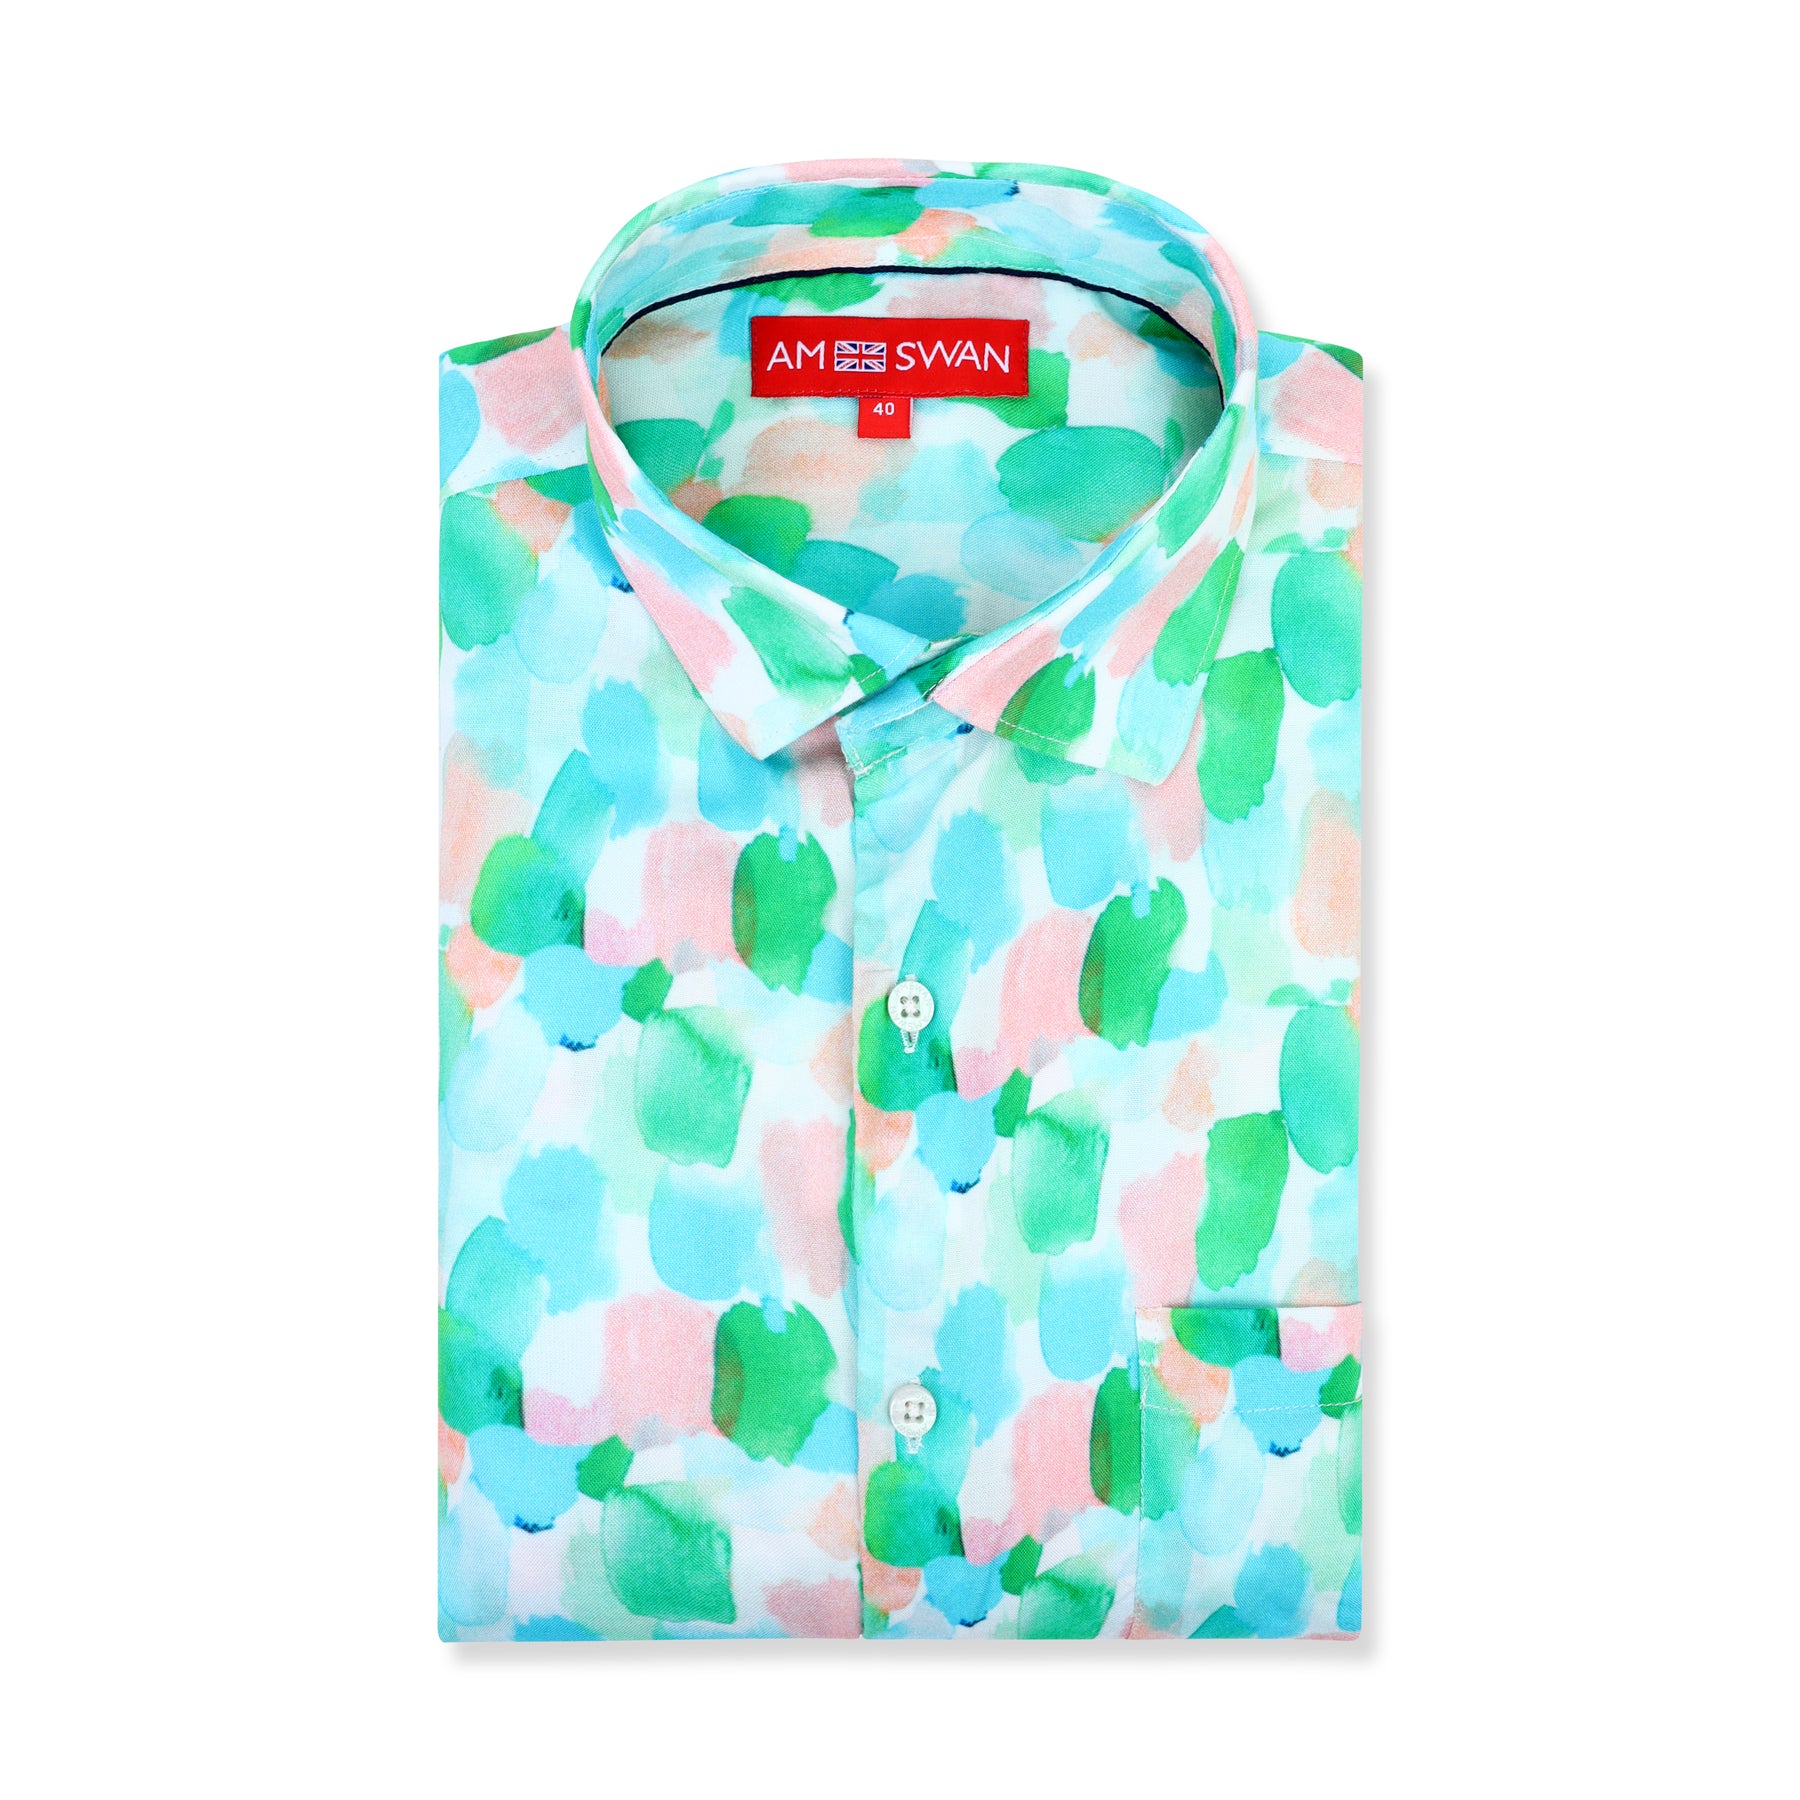 Premium Shirt For Men's In Rayon Fabric